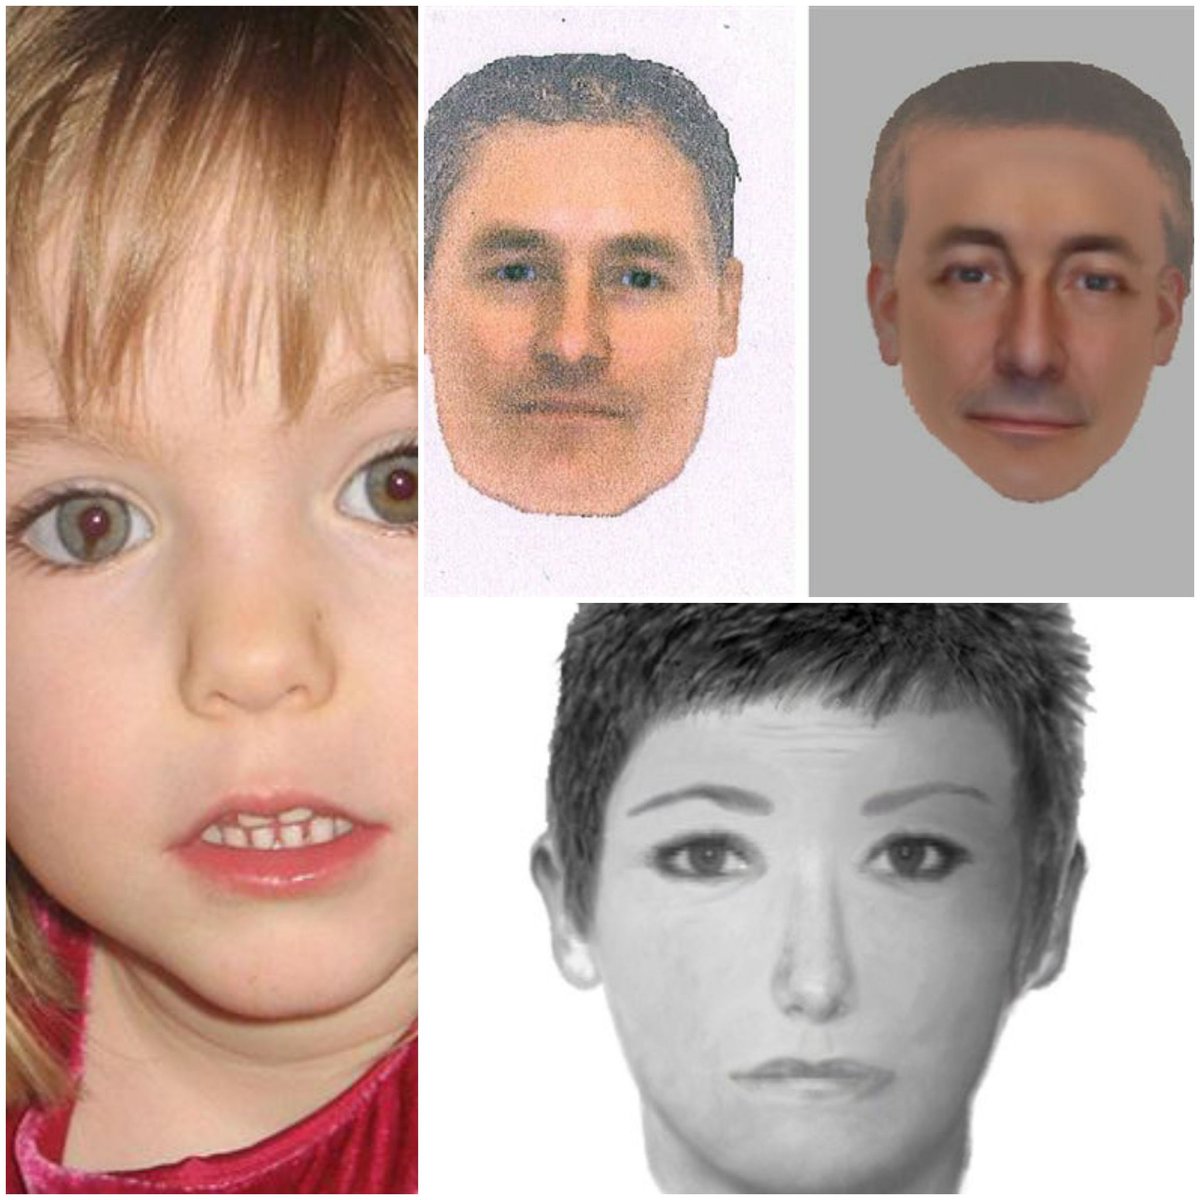 On May 3, 2007, 3-year-old Madeleine McCann vanished from her bed at her family's vacation apartment in Praia da Luz, Portugal. It's been 17 years. Does anybody recognize the police sketch of the suspects?